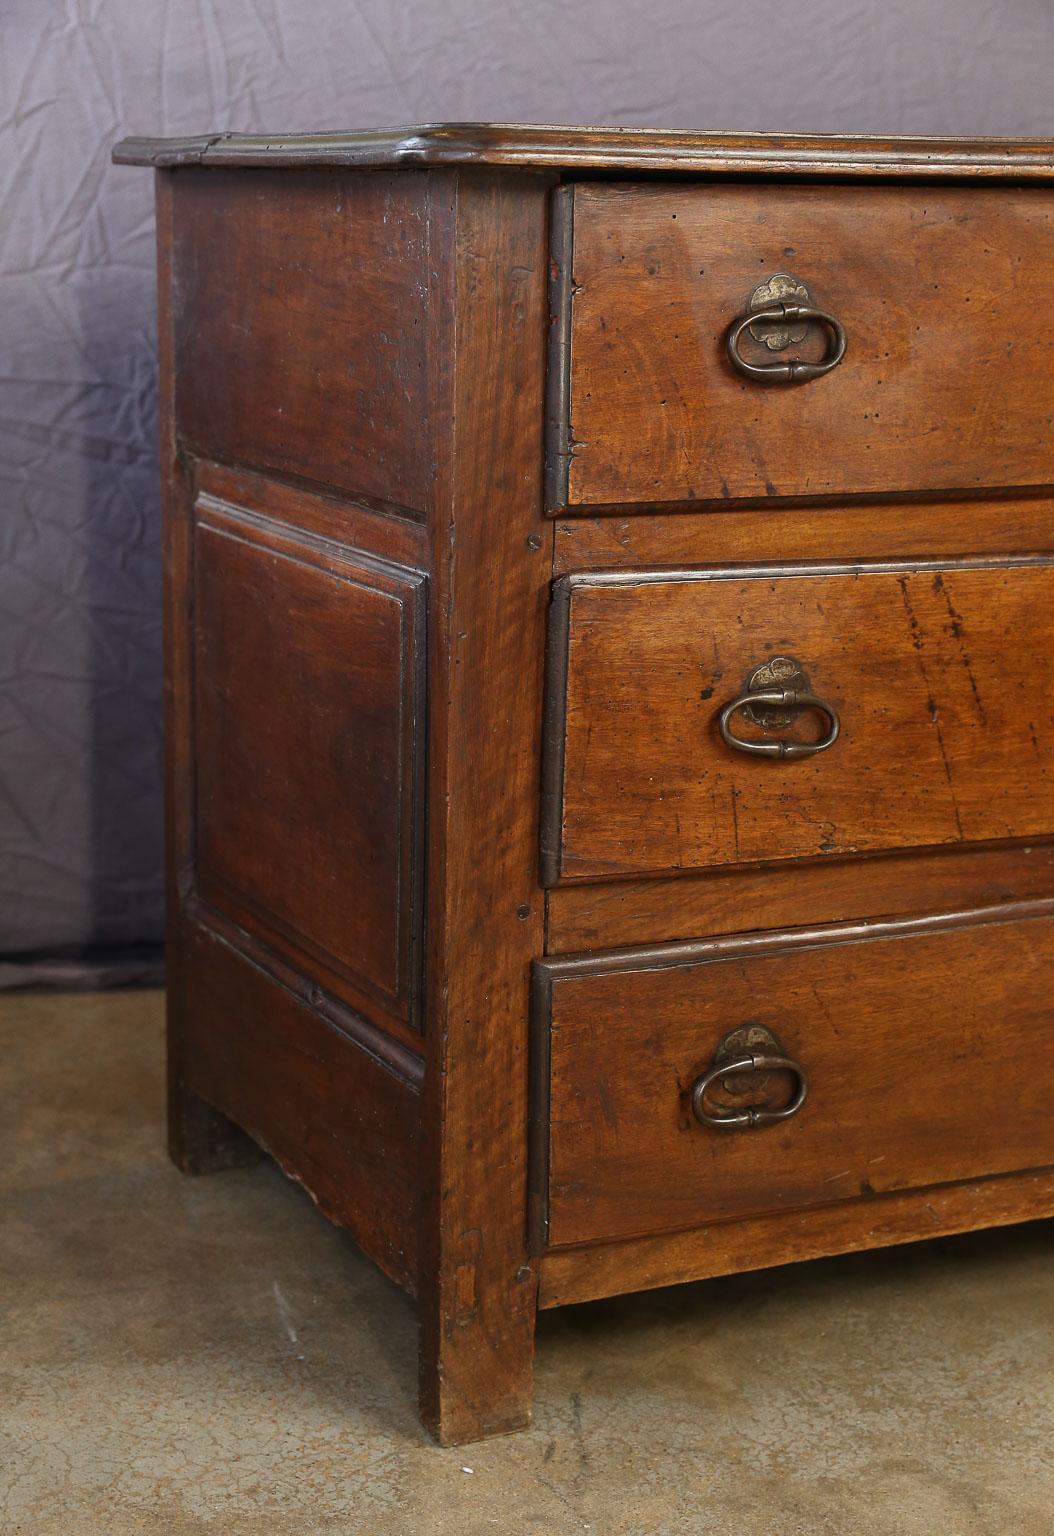 This French walnut three-drawer chest has a lovely hand waxed patina. Each of the three drawers has two iron pulls and a key hole, two of the drawers have a locking mechanism although no keys are available. A versatile piece in both form and